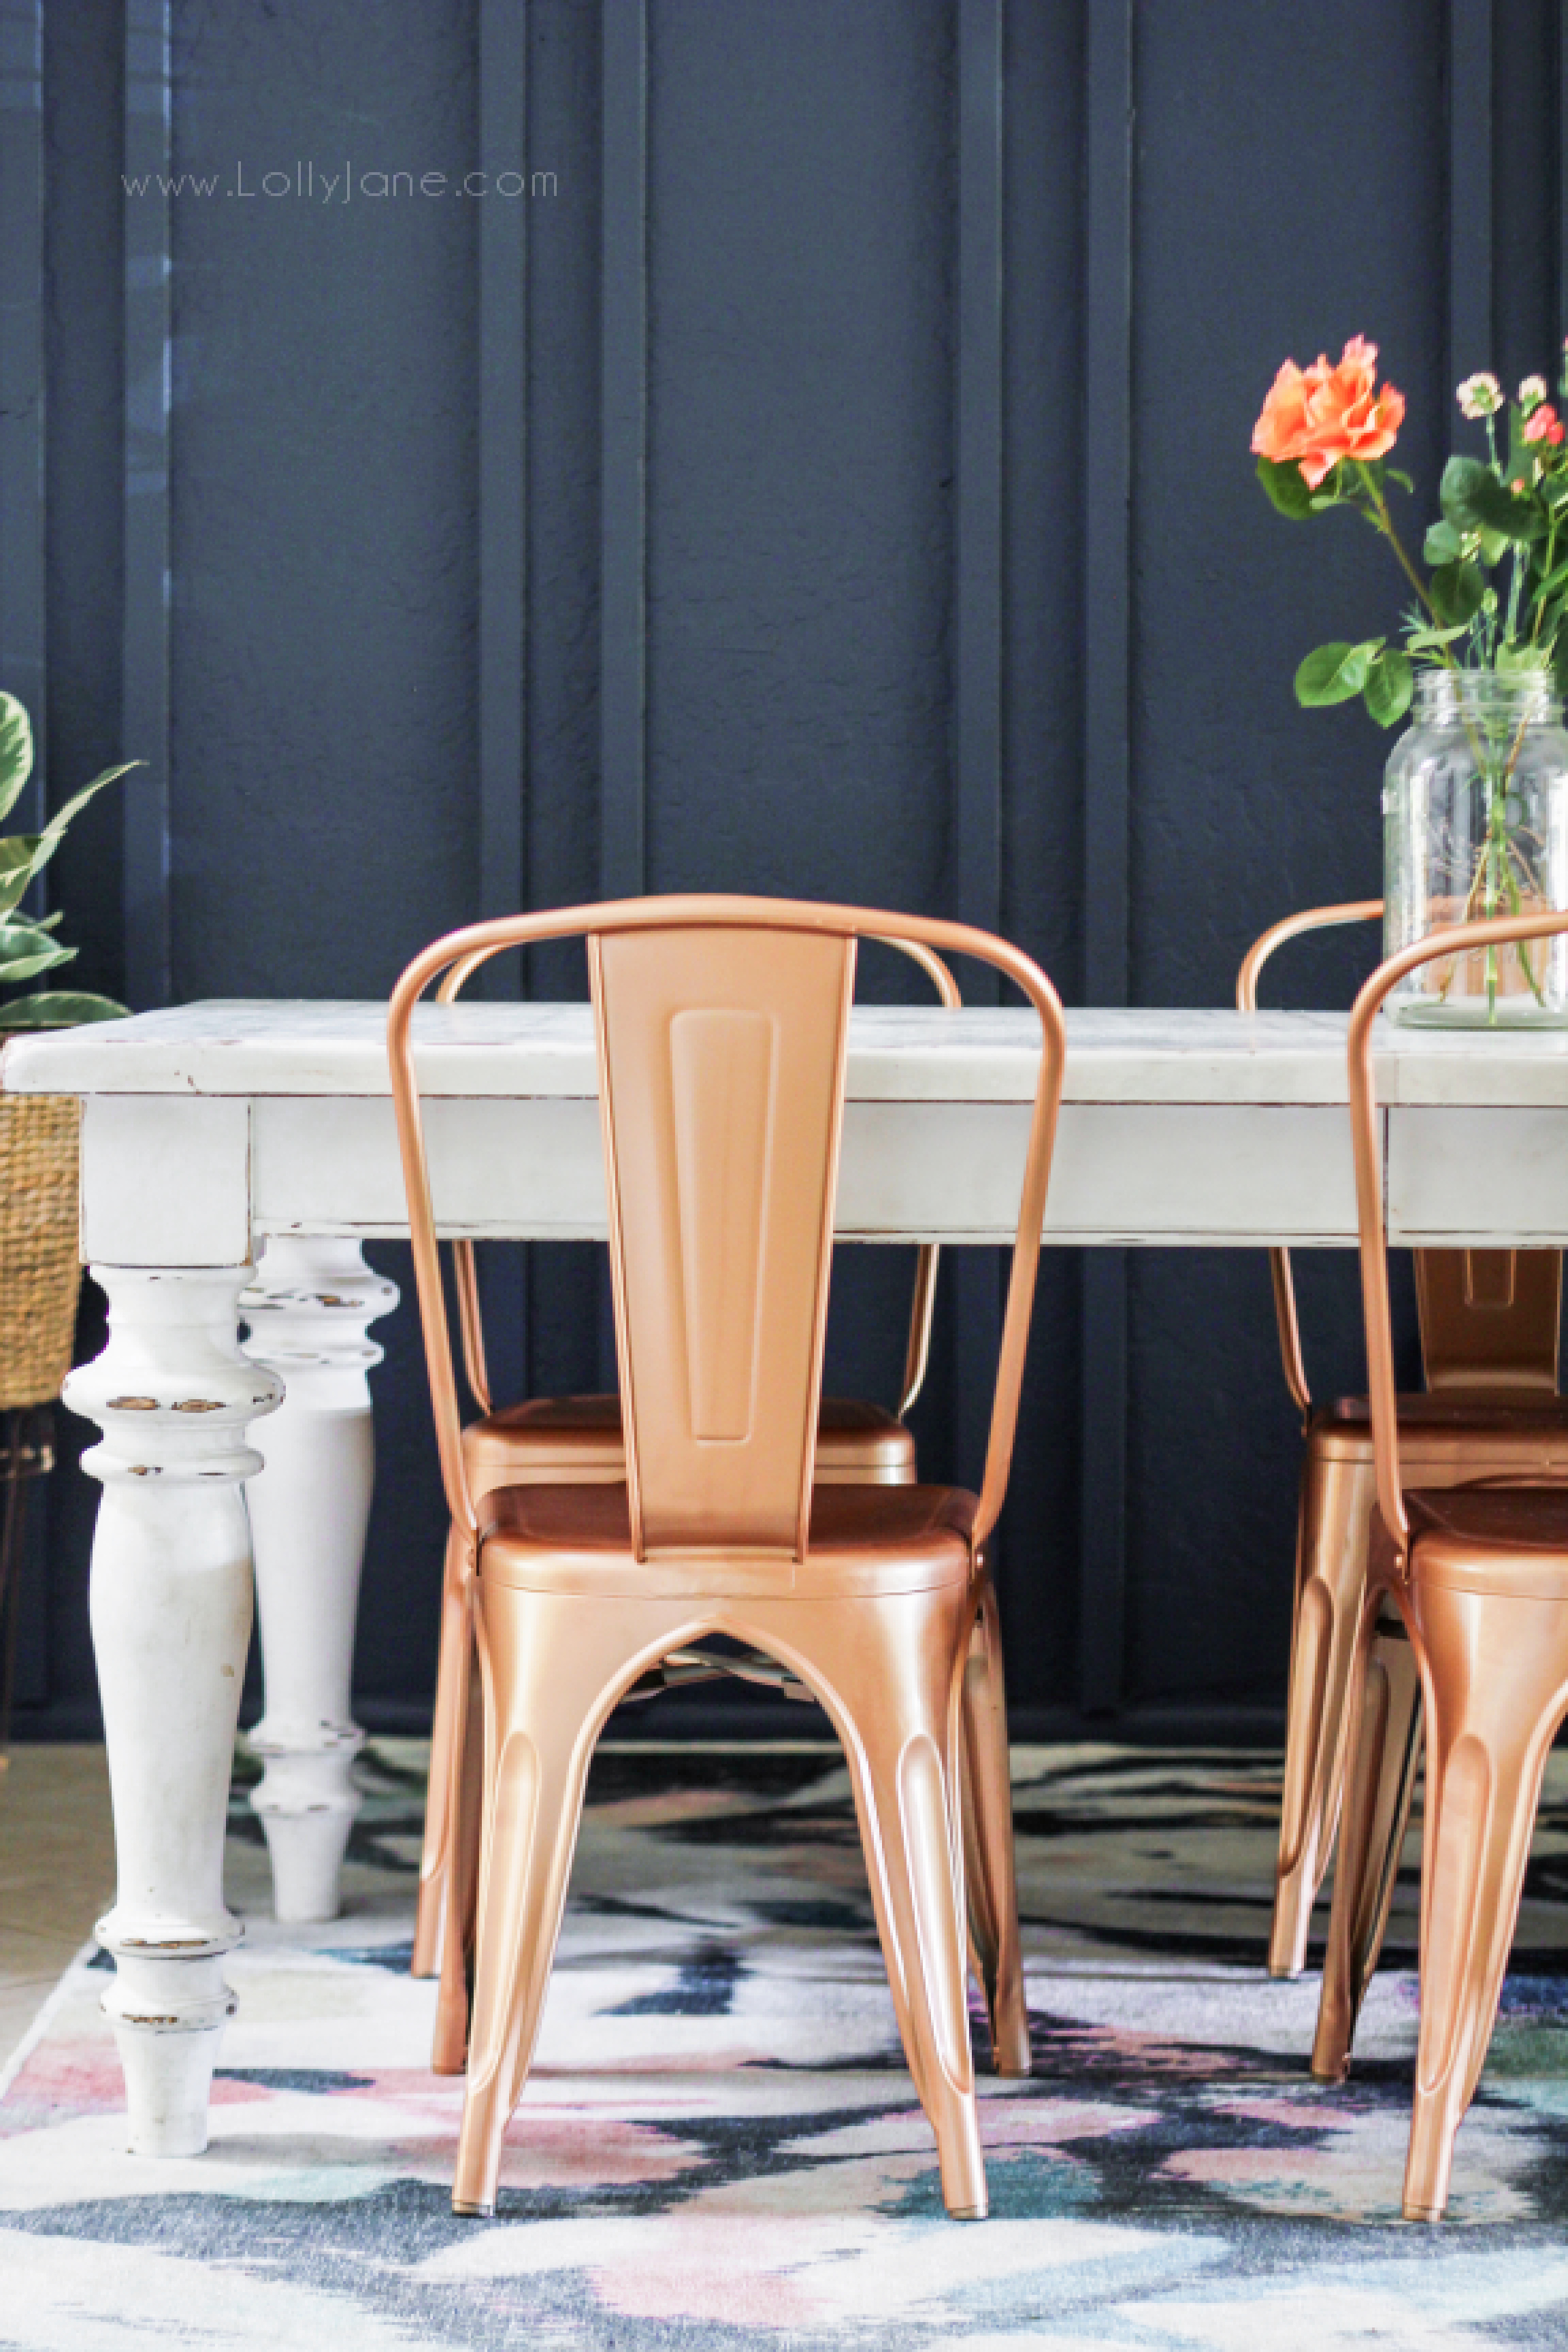 This dining room makeover is a total transformation, wow! With less than $300, we built a double batten wall treatment, primed and painted it, painted the dining room chairs and added a thrifted basket wall! Come check out all the details of this darling navy boho style dining room! #bohodecor #navybluediningroom #navywallideas #copperchairs #spraypaintedbohochairs #rosegoldchairs #howtodecorateadiningroom